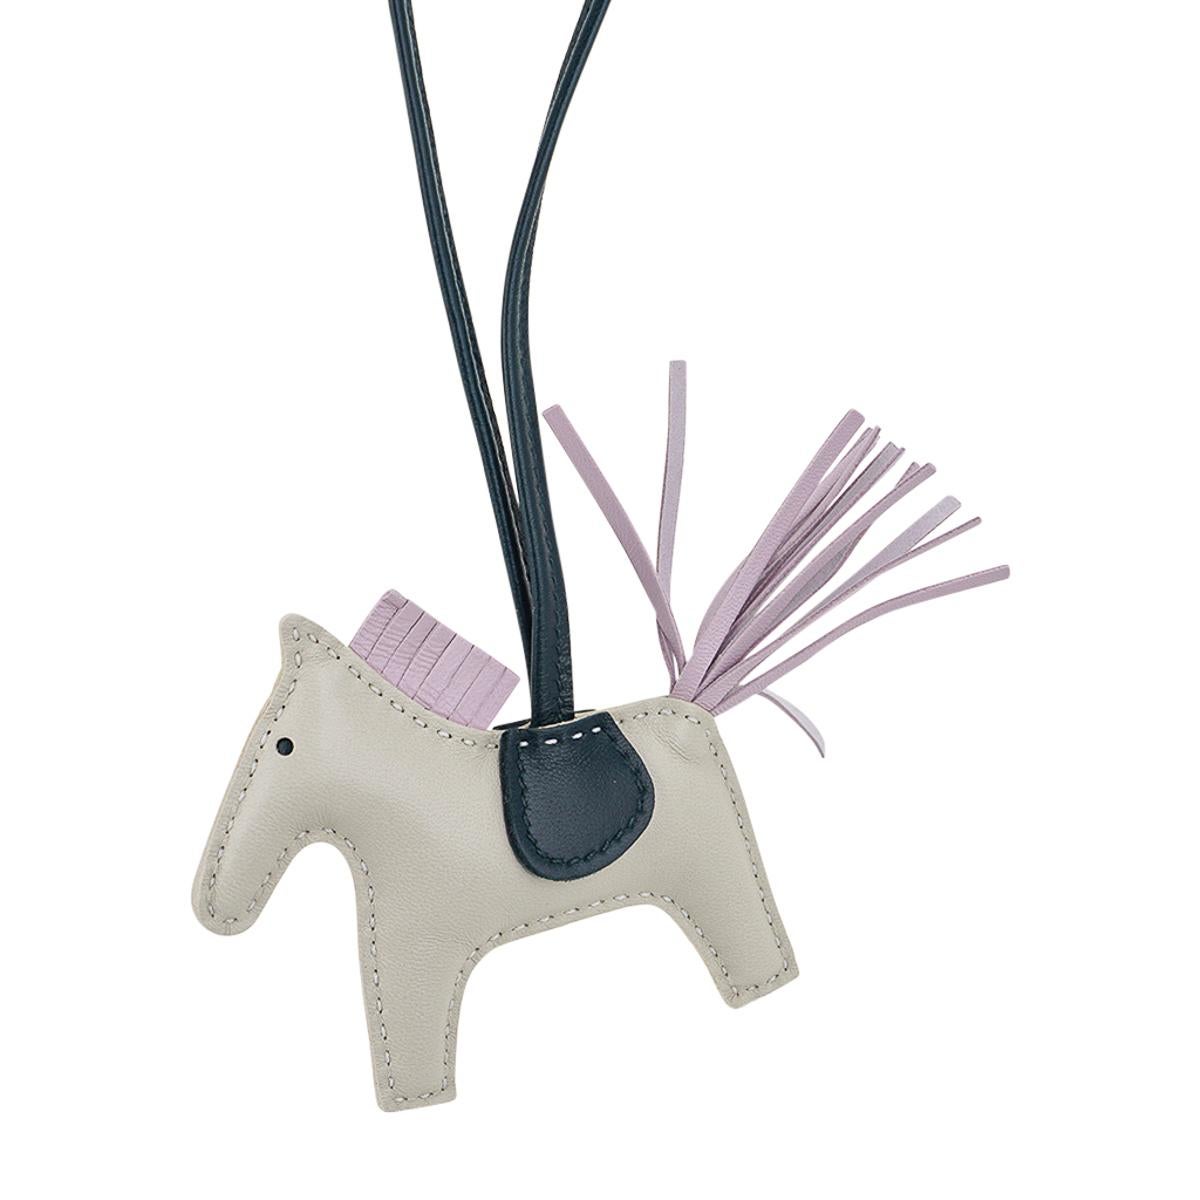 Mightychic offers an Hermes PM Rodeo bag charm featured in Craie, Mauve Pale and Vert Cypress.
Charming and playful she easily adorns a myriad bag colors in your fabulous collection. 
Skin is Milo lambskin.
Signature HERMES PARIS MADE IN FRANCE is